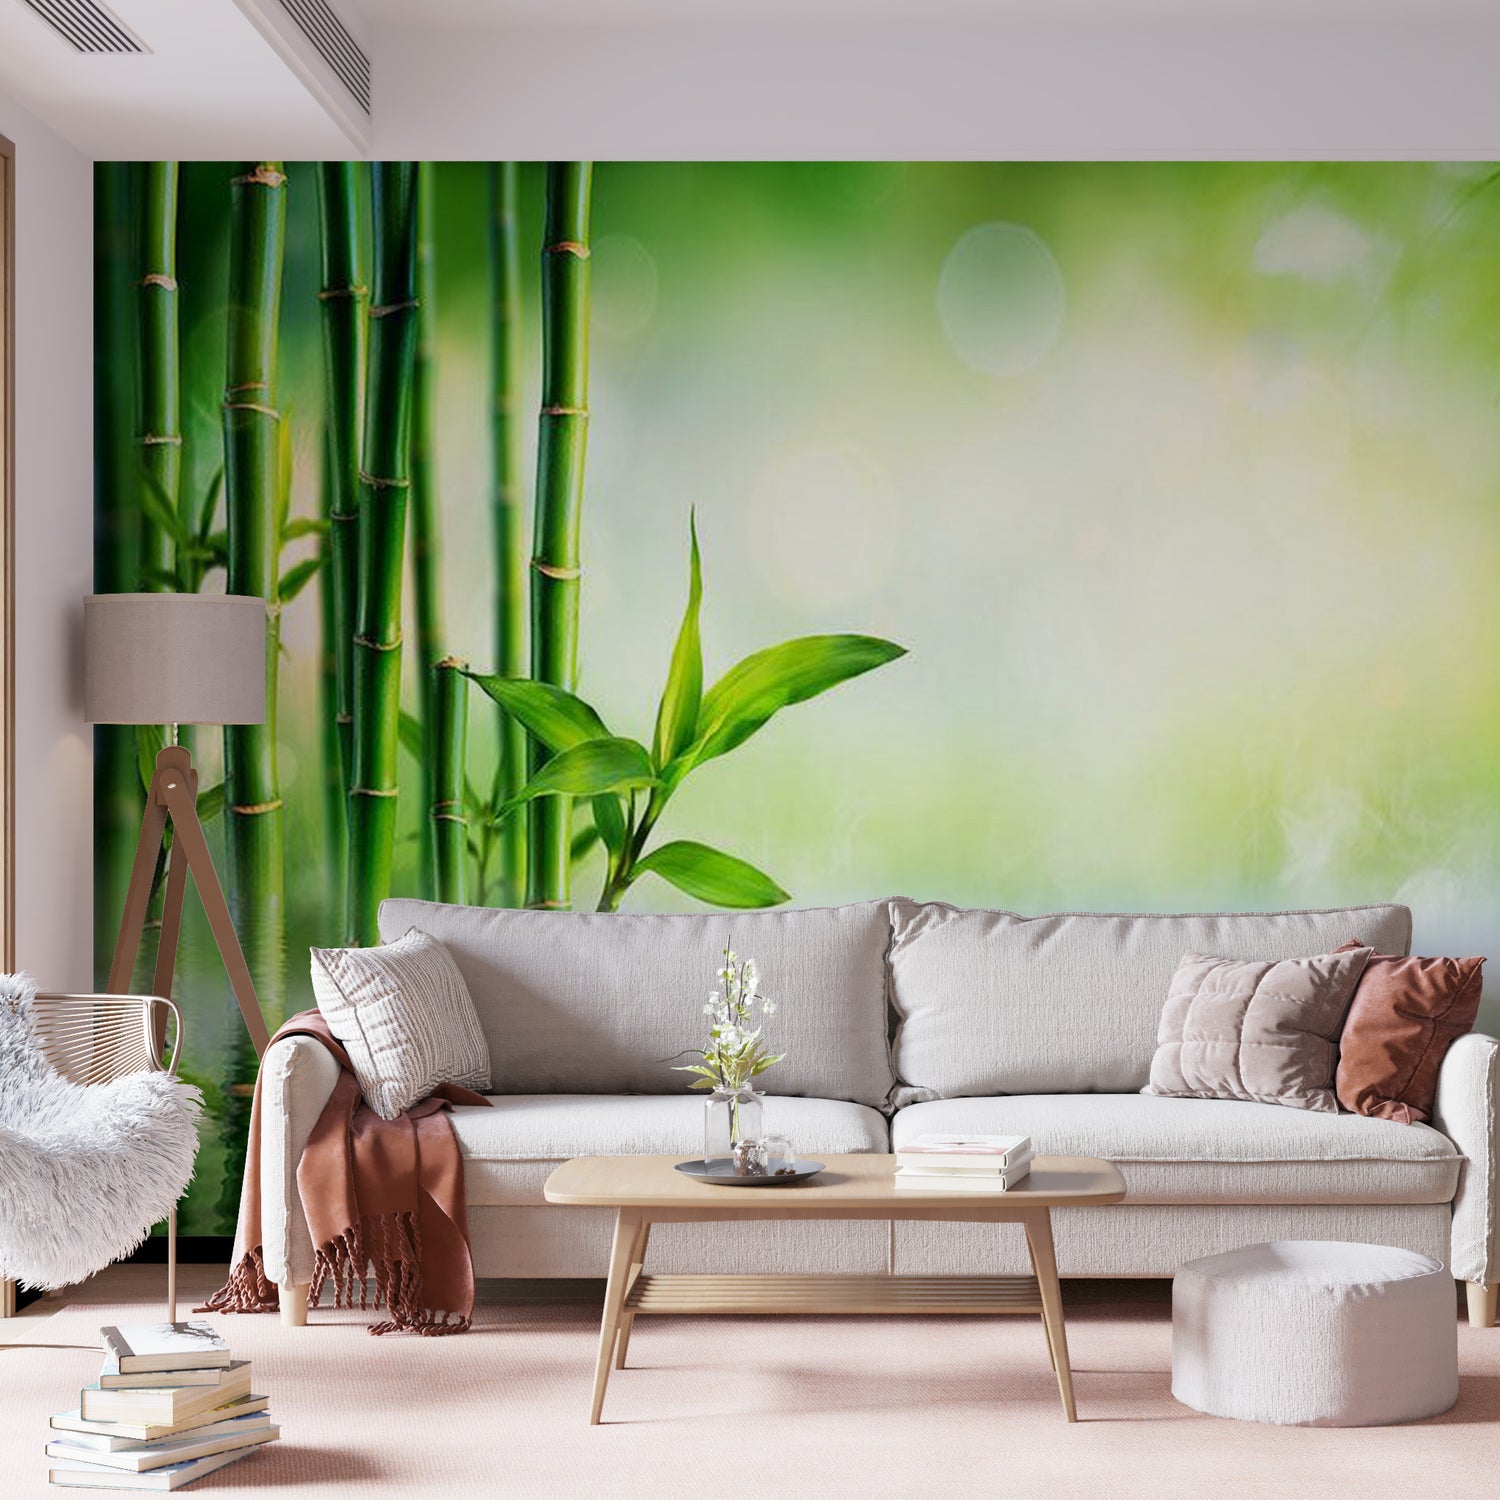 Peel & Stick Zen Wall Mural - Bamboo Spa Grove - Removable Wall Decals